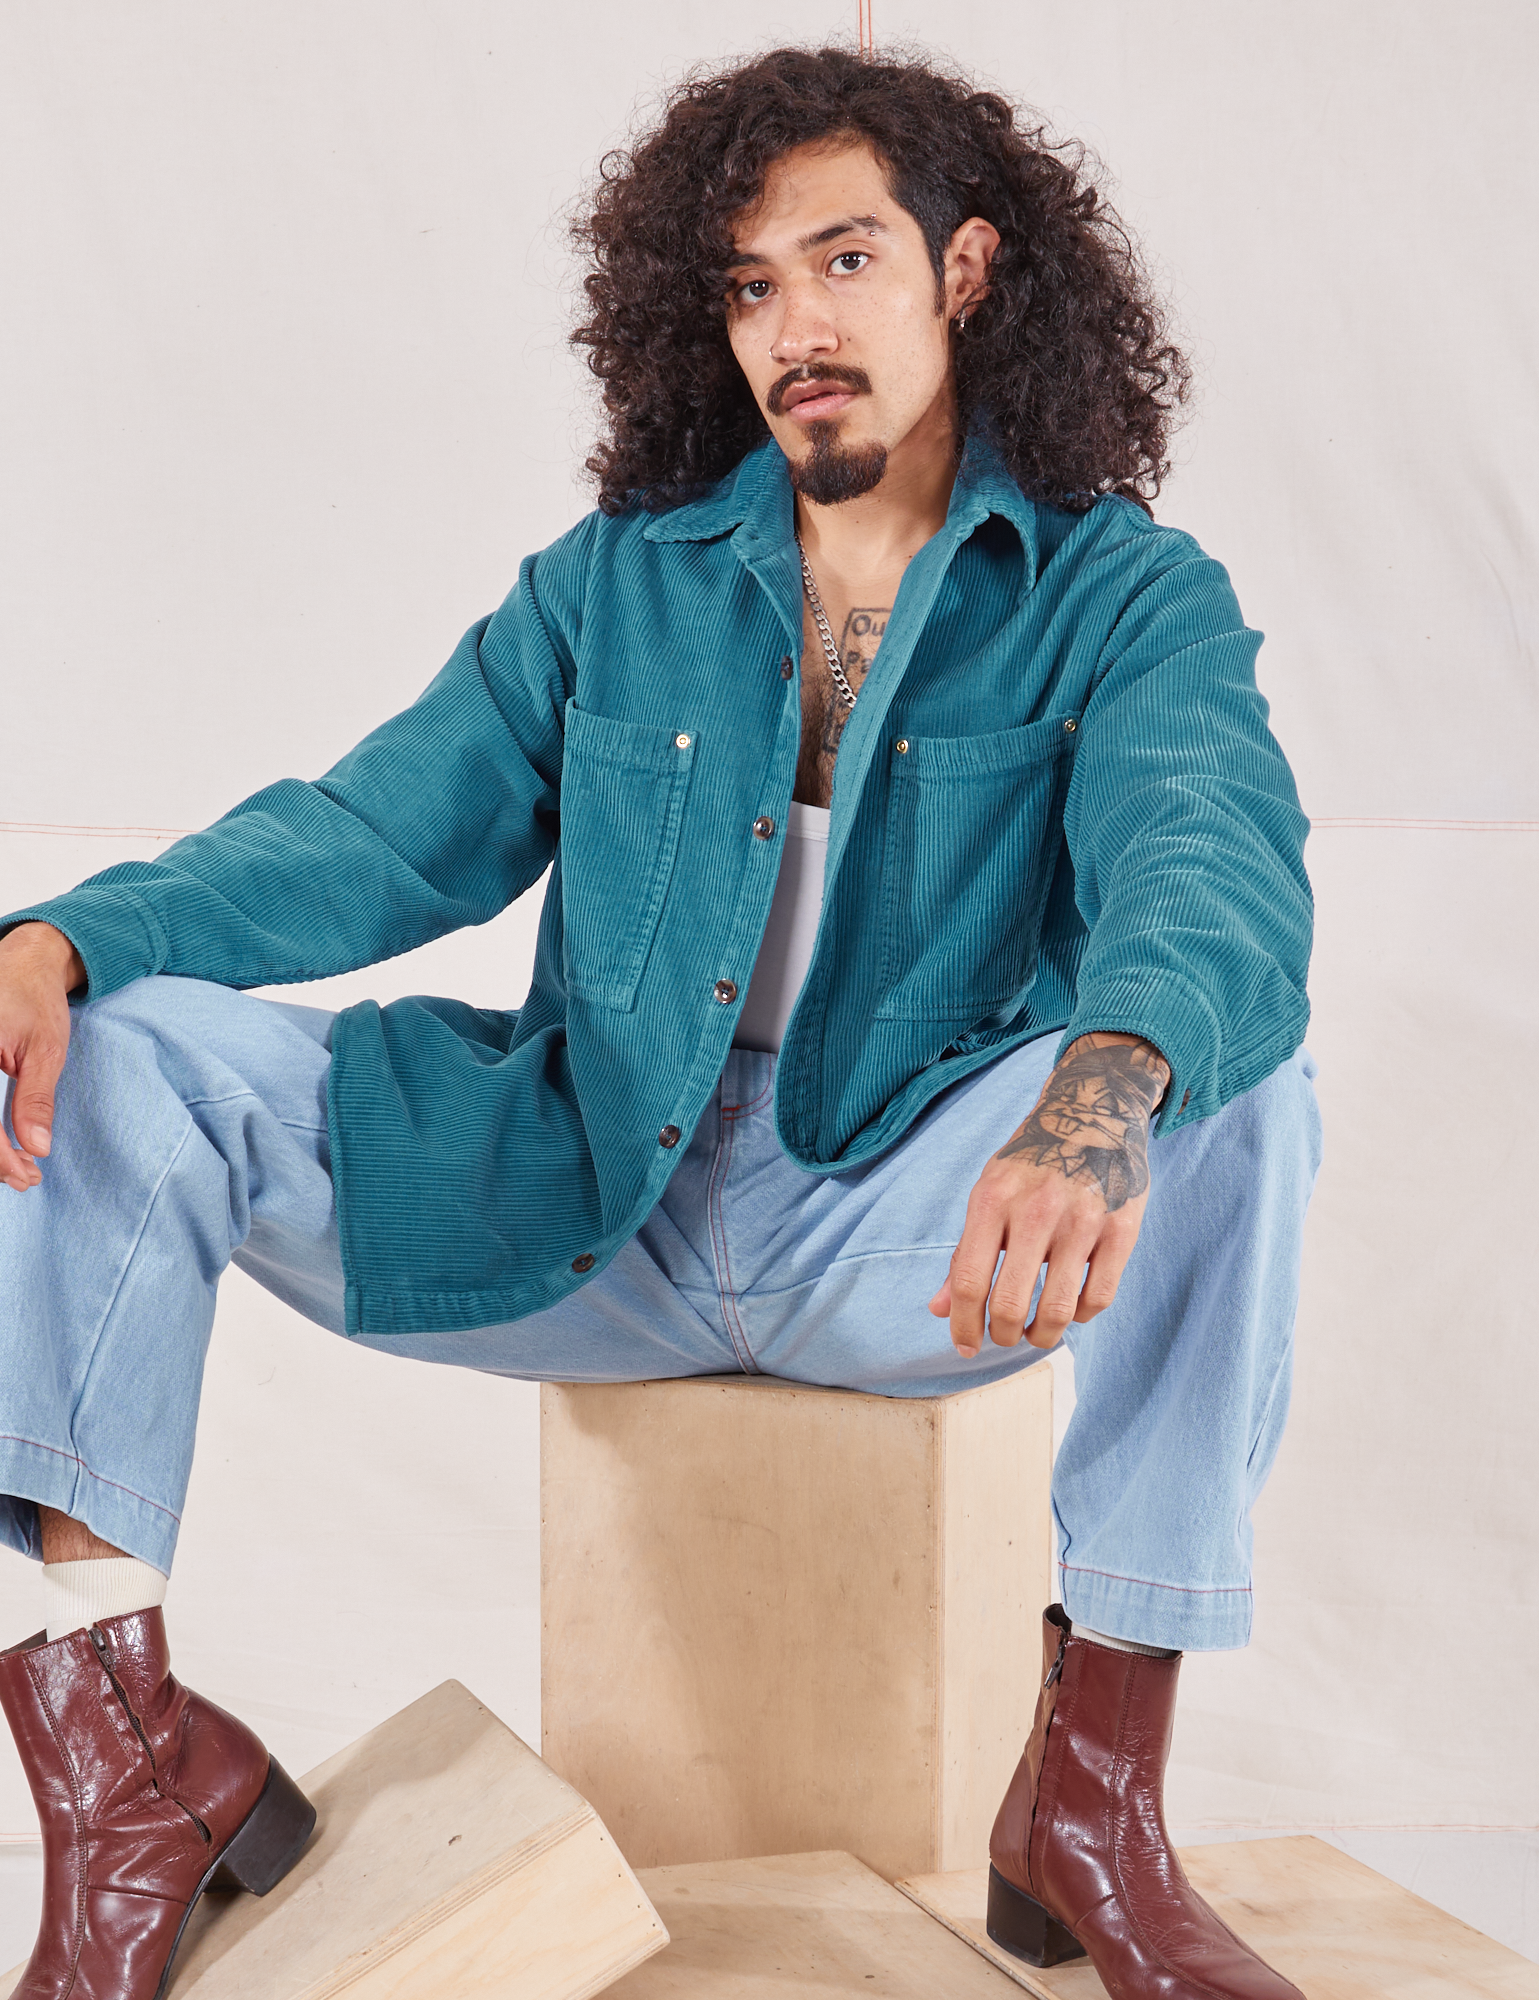 Jesse is wearing Corduroy Overshirt in Marine Blue and light wash Denim Trouser Jeans sitting on a wooden crate